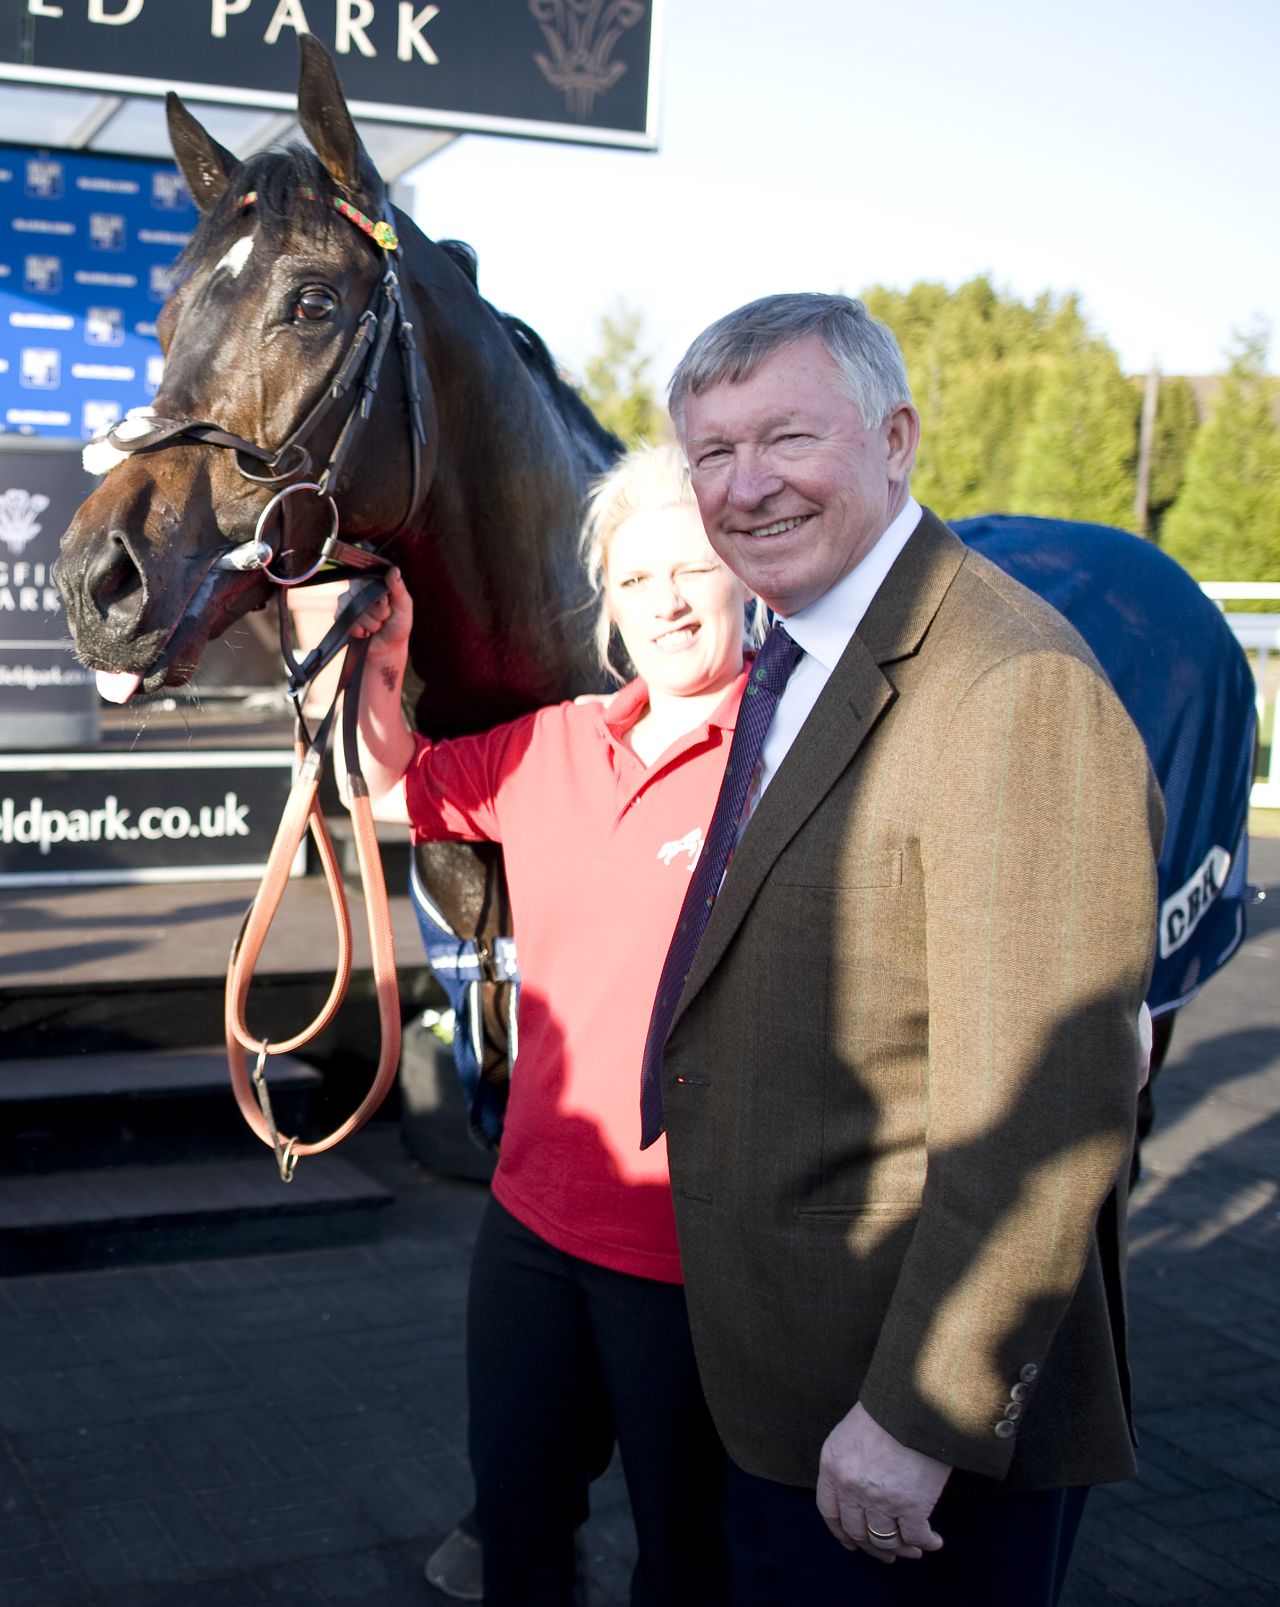 Soccer icon Alex Ferguson is a renowned owner of racehorses. Seen here with latest runner Forgotten Hero, the Manchester United manager was involved in a legal battle with Coolmore stud owner (and then major United shareholder) John Magnier about the stud fees of 2002 European Horse of the Year Rock of Gibraltar. <br />